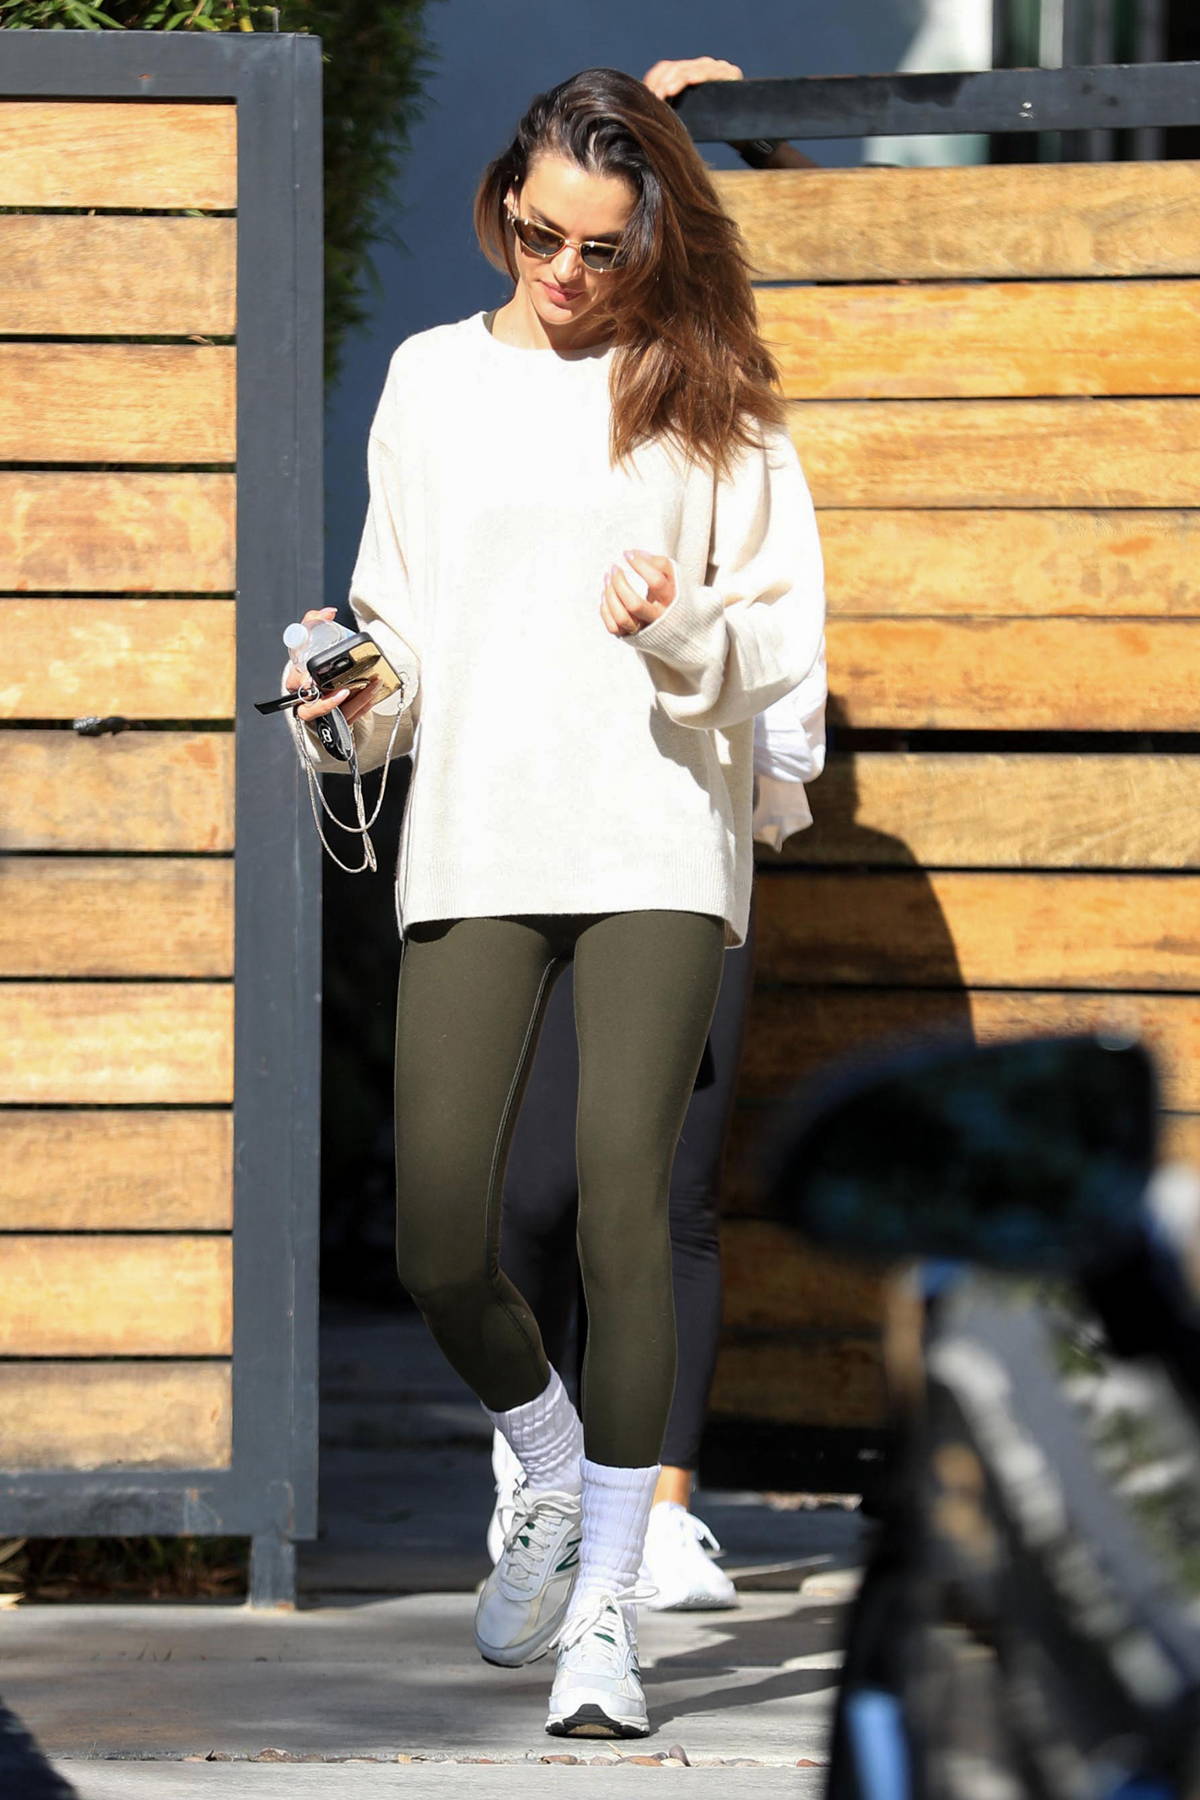 Alessandra Ambrosio keeps it sporty in beige workout top and